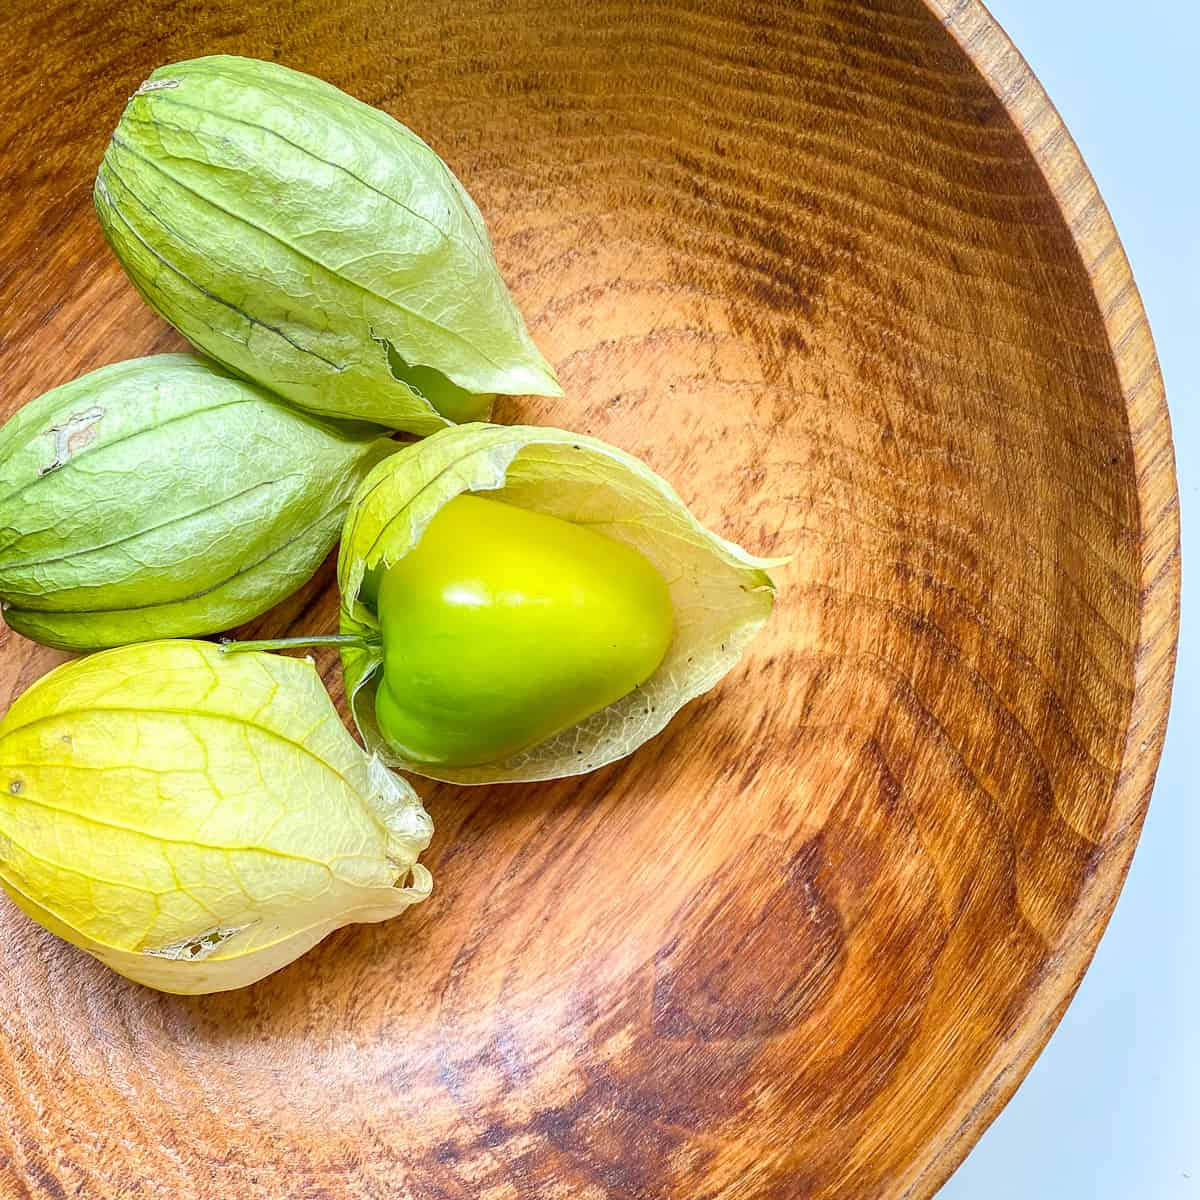 A bowl filled with tomatillos.